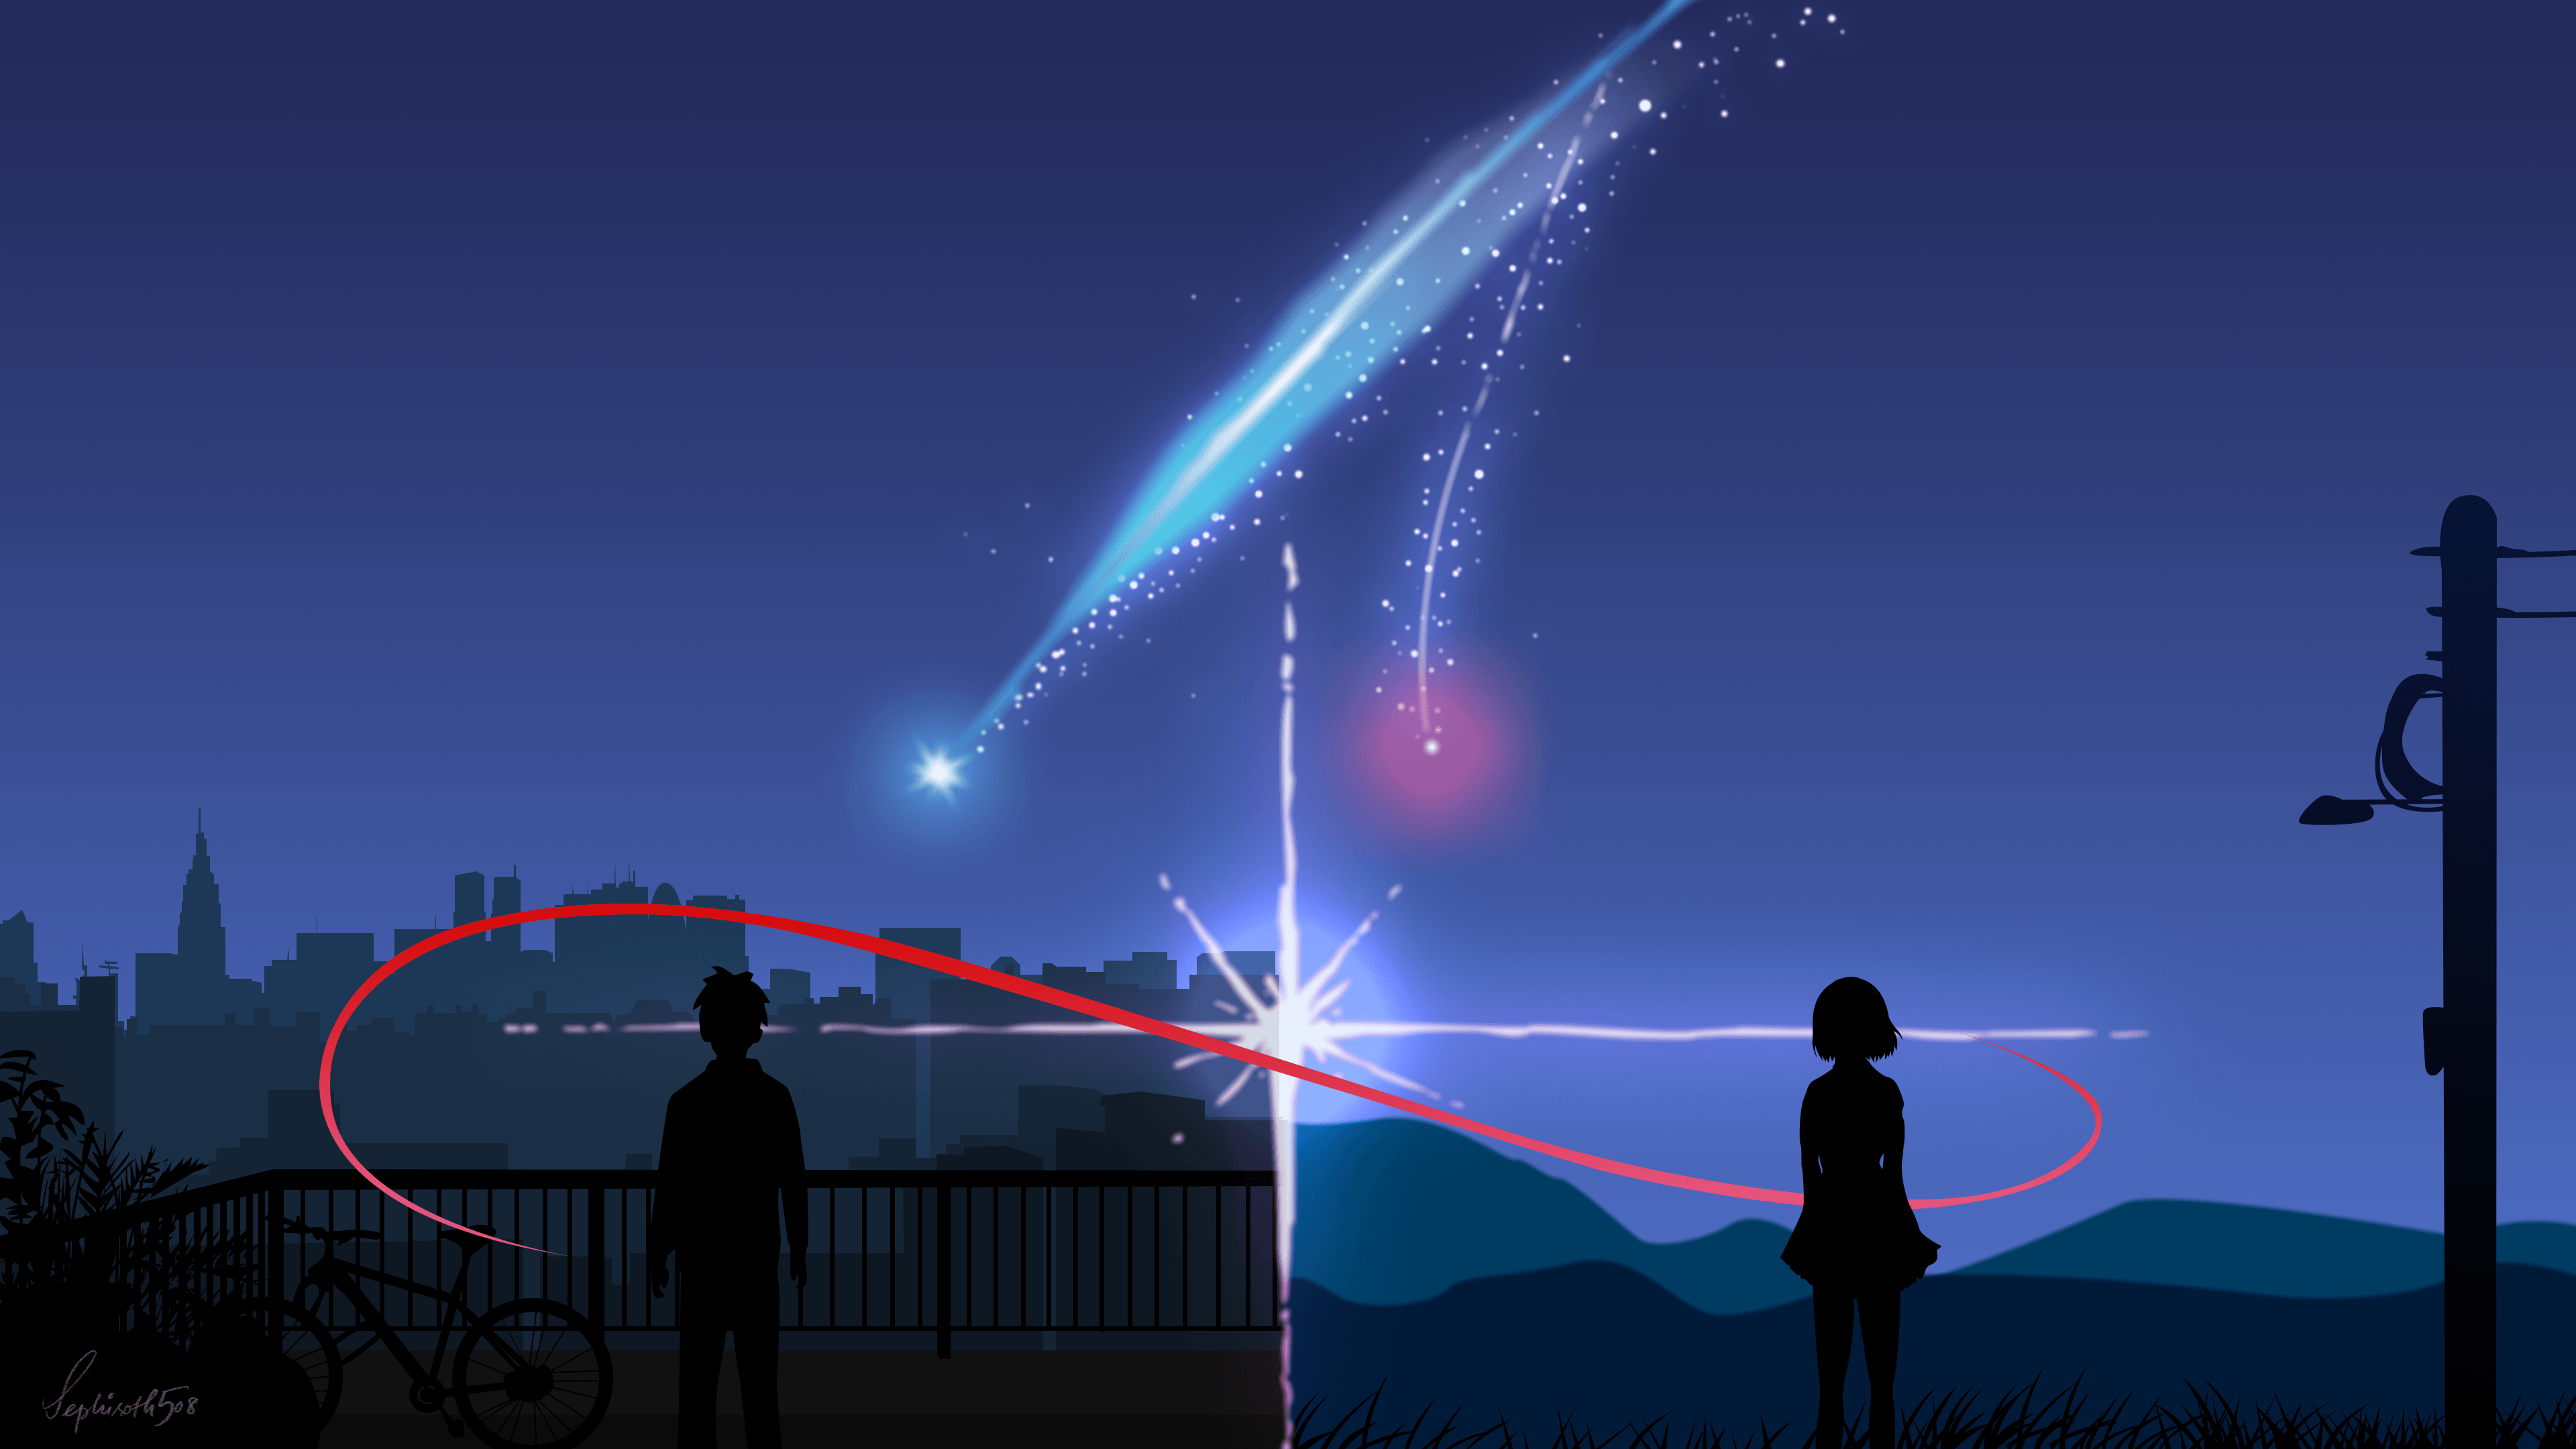 Your Name 4k Ultra HD Wallpaper. Background Imagex2160